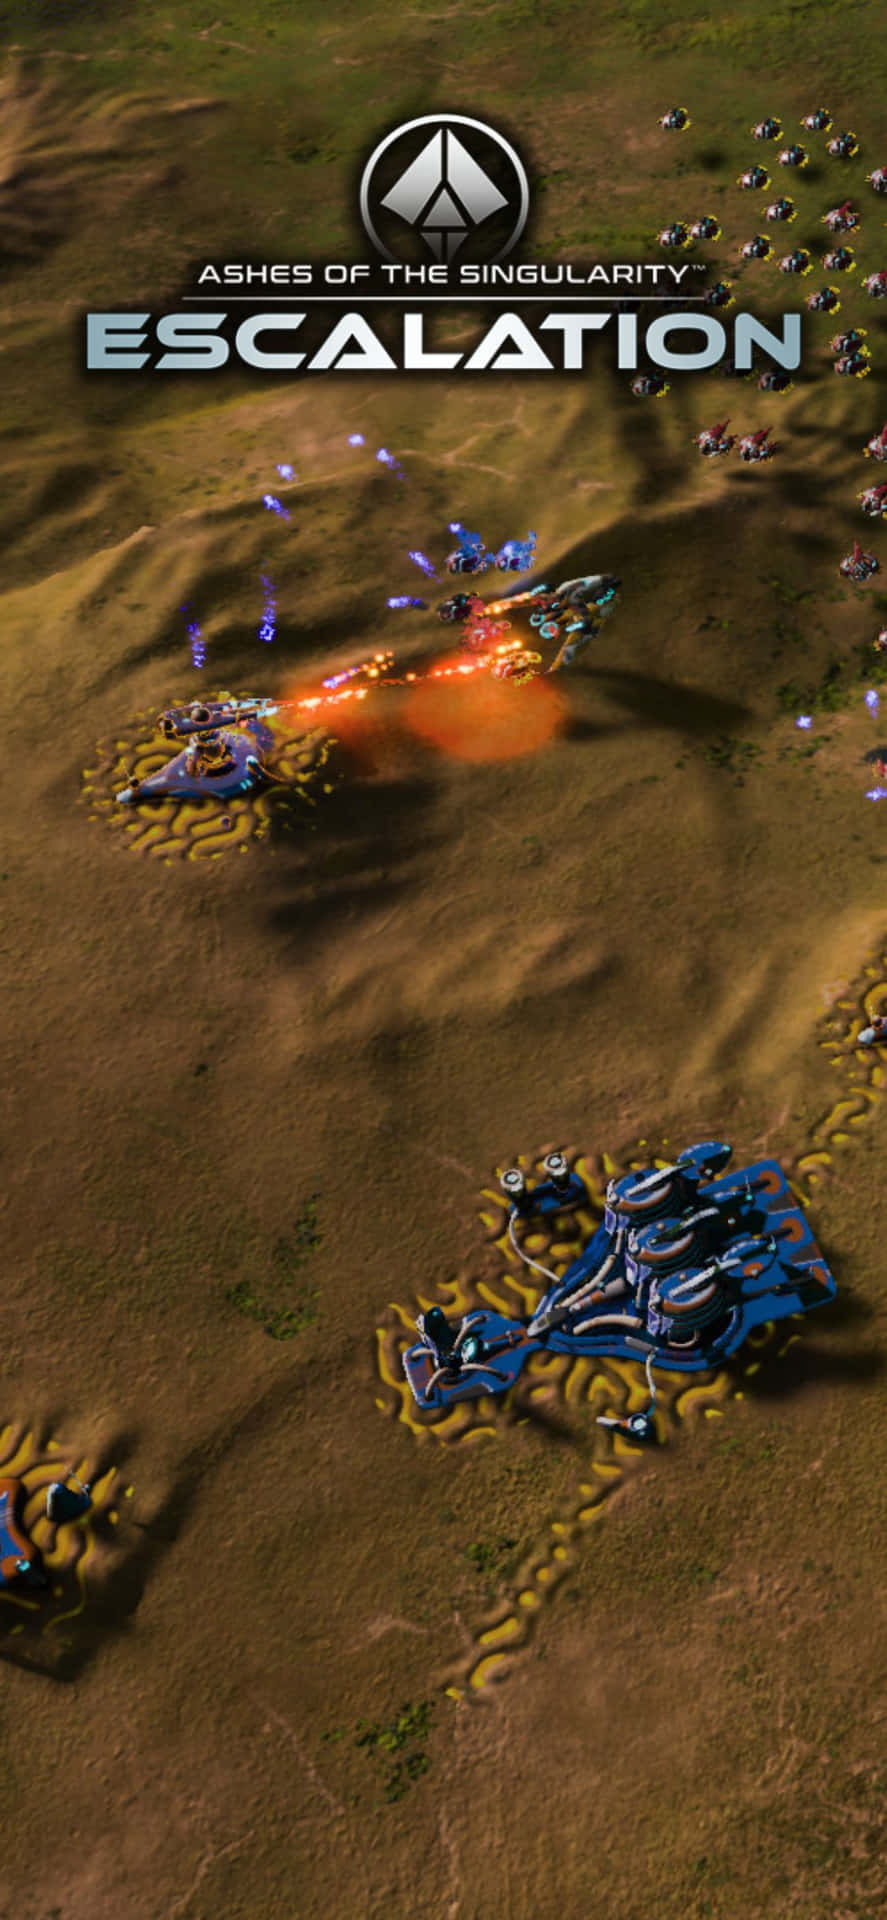 Conquer the universe in 'Ashes of the Singularity Escalation' on the Iphone X